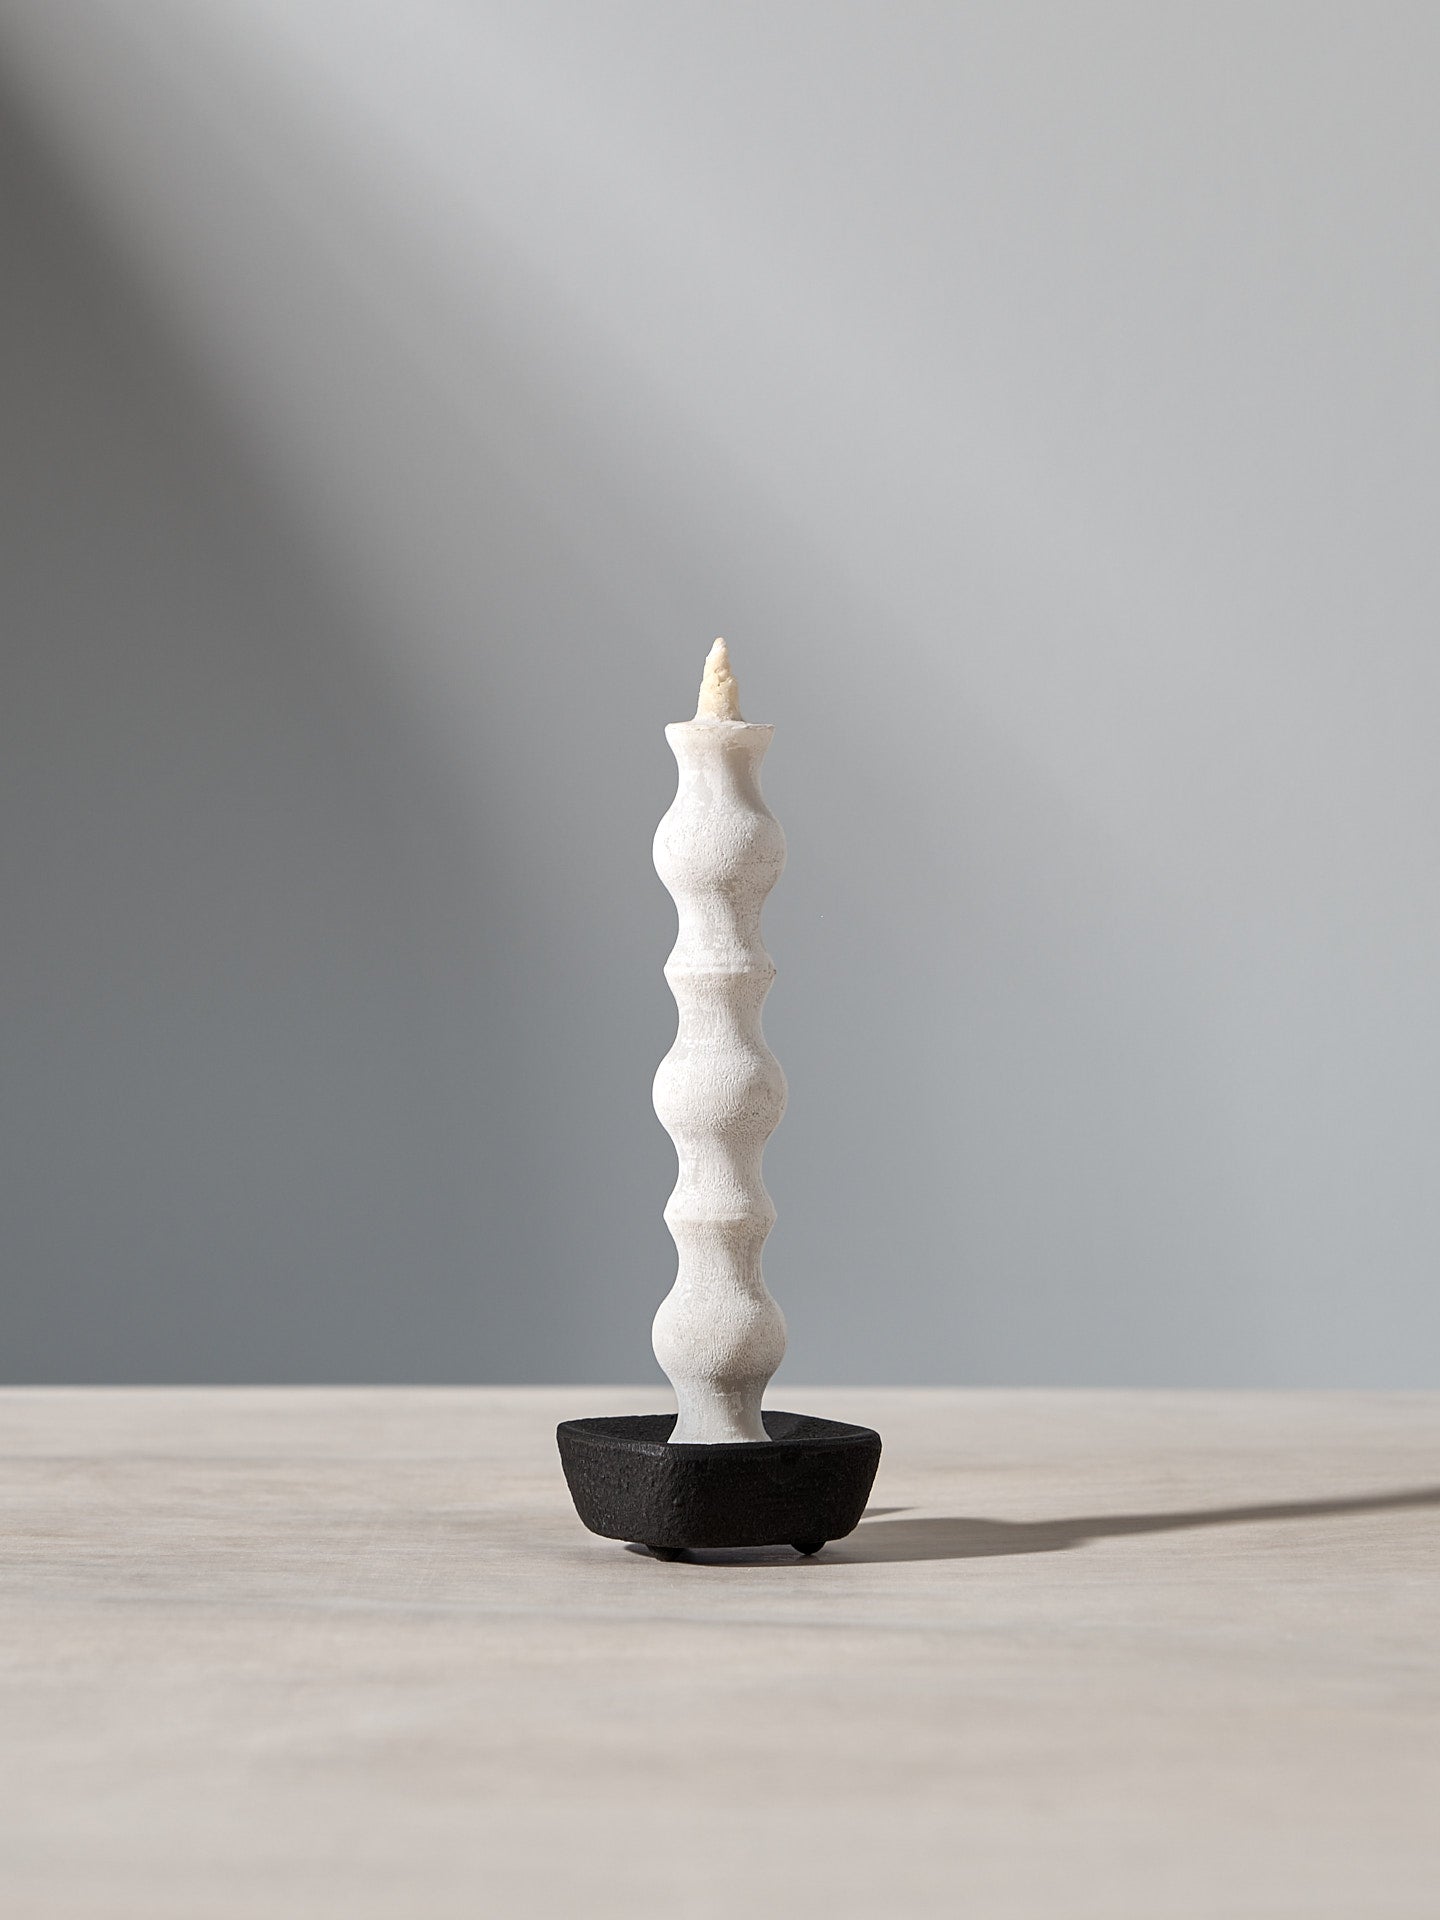 A NANAO-L candle is sitting on a table with a light behind it. [Brand name: Takazawa]